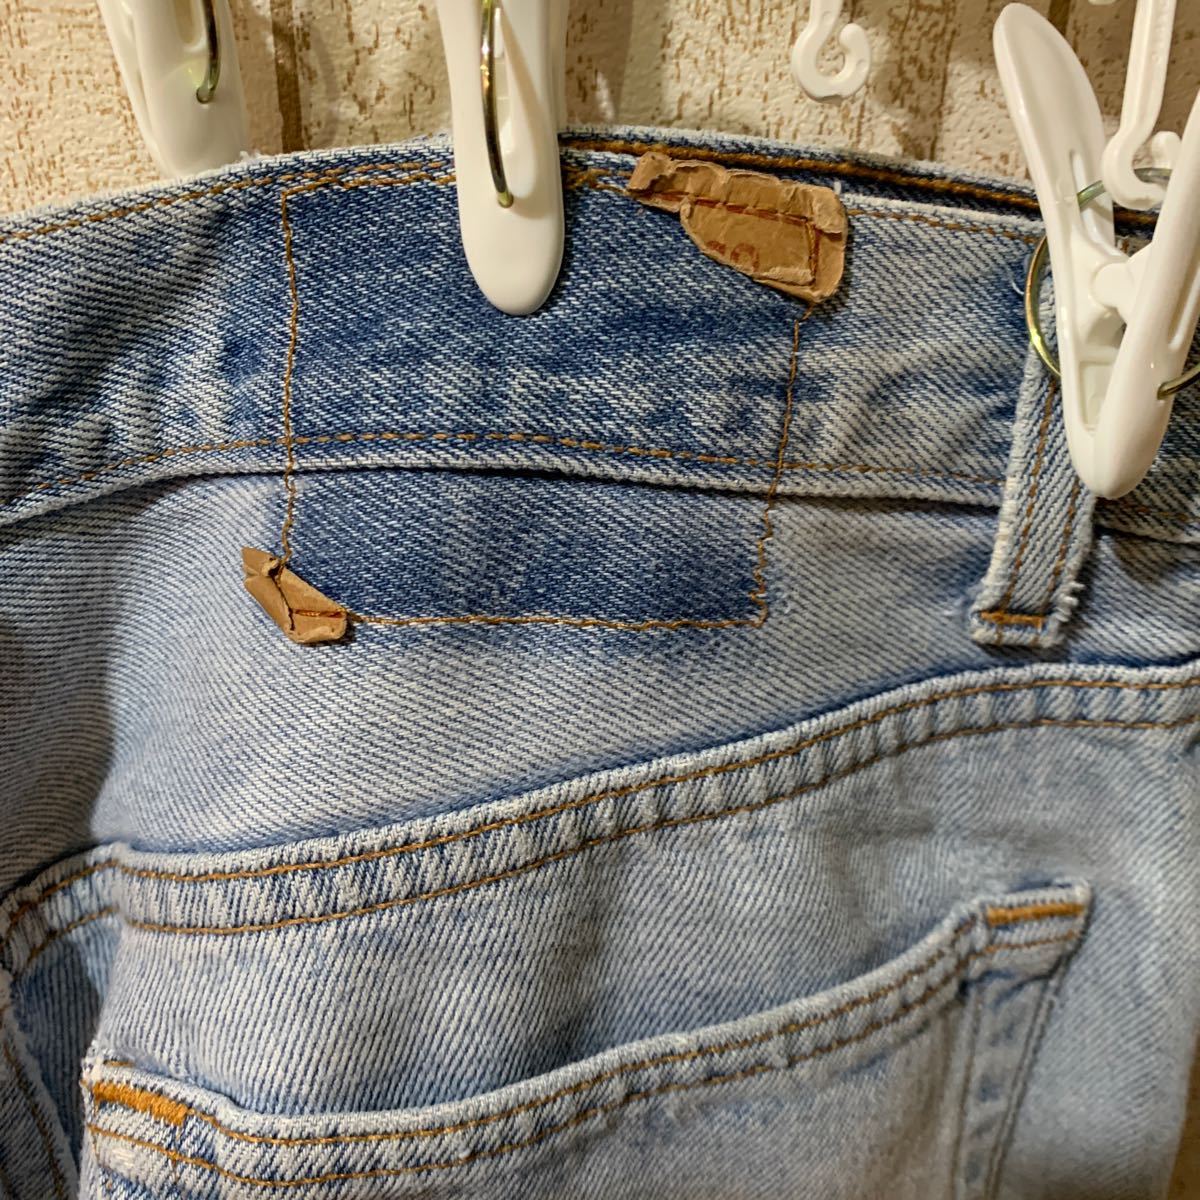 90s Levi's 501 米国製 w35 トップボタン裏653 リーバイス MADE IN U.S.A. _画像4